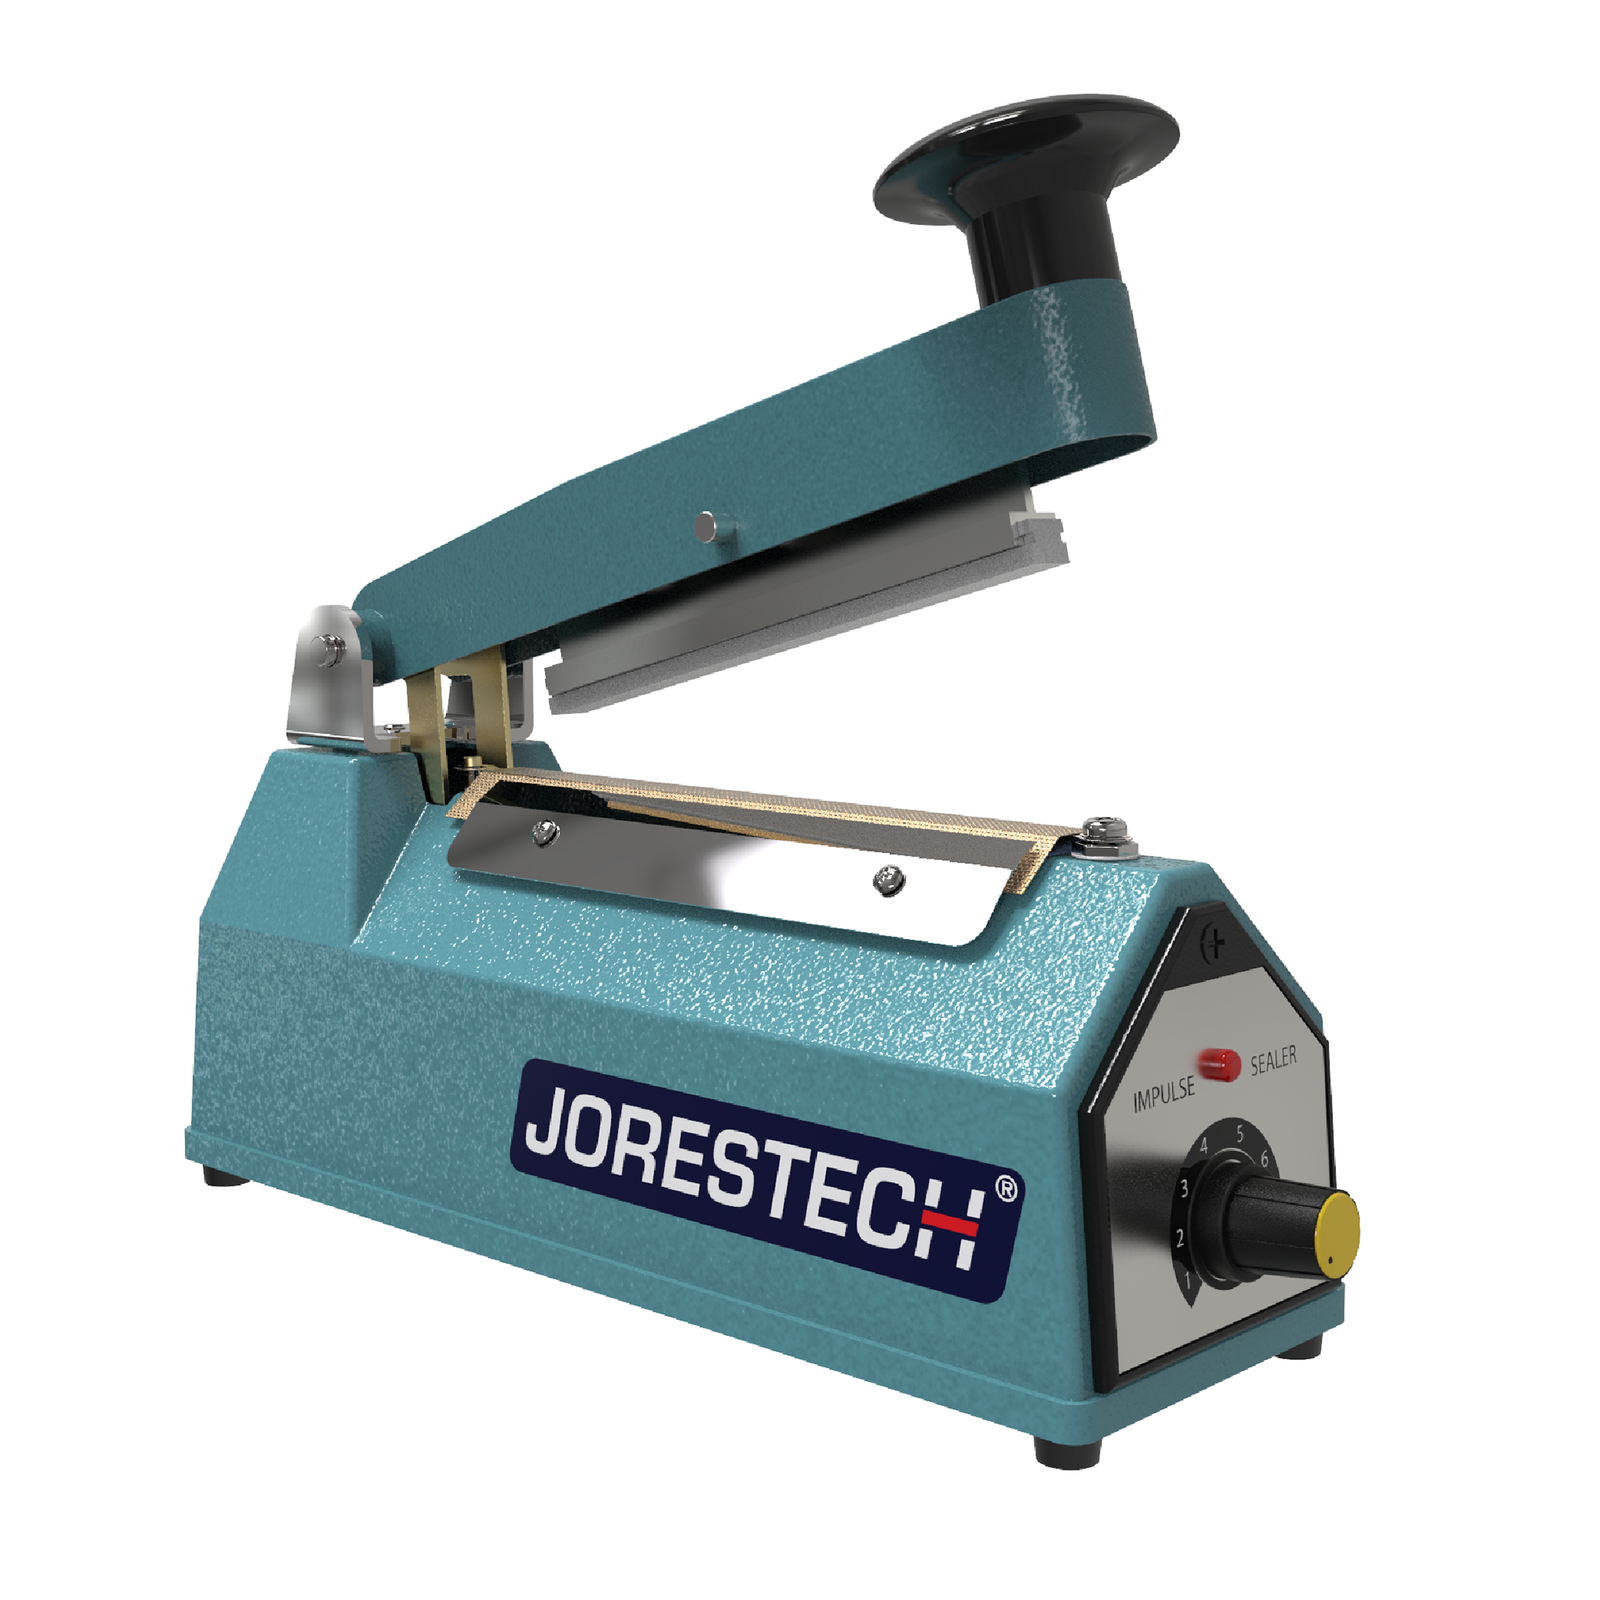 4 Inch manual impulse sealer machine. Bag sealing machine is shown with open jaw and JORES TECHNOLOGIES® logo